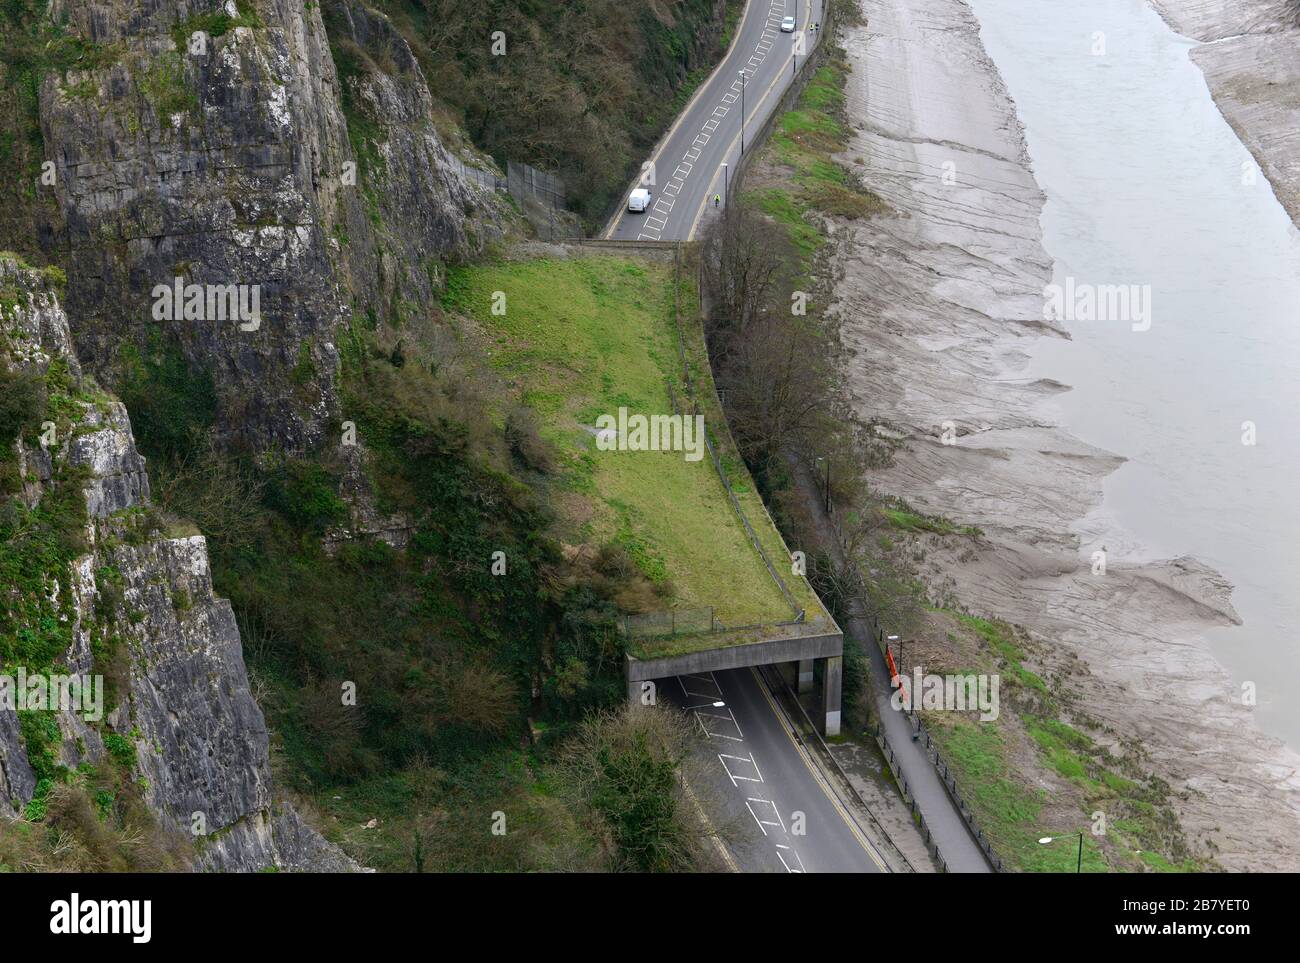 View from above of the gallery rock shelter over the Portway road under the Clifton Suspension Bridge, Clifton, Bristol, UK Stock Photo